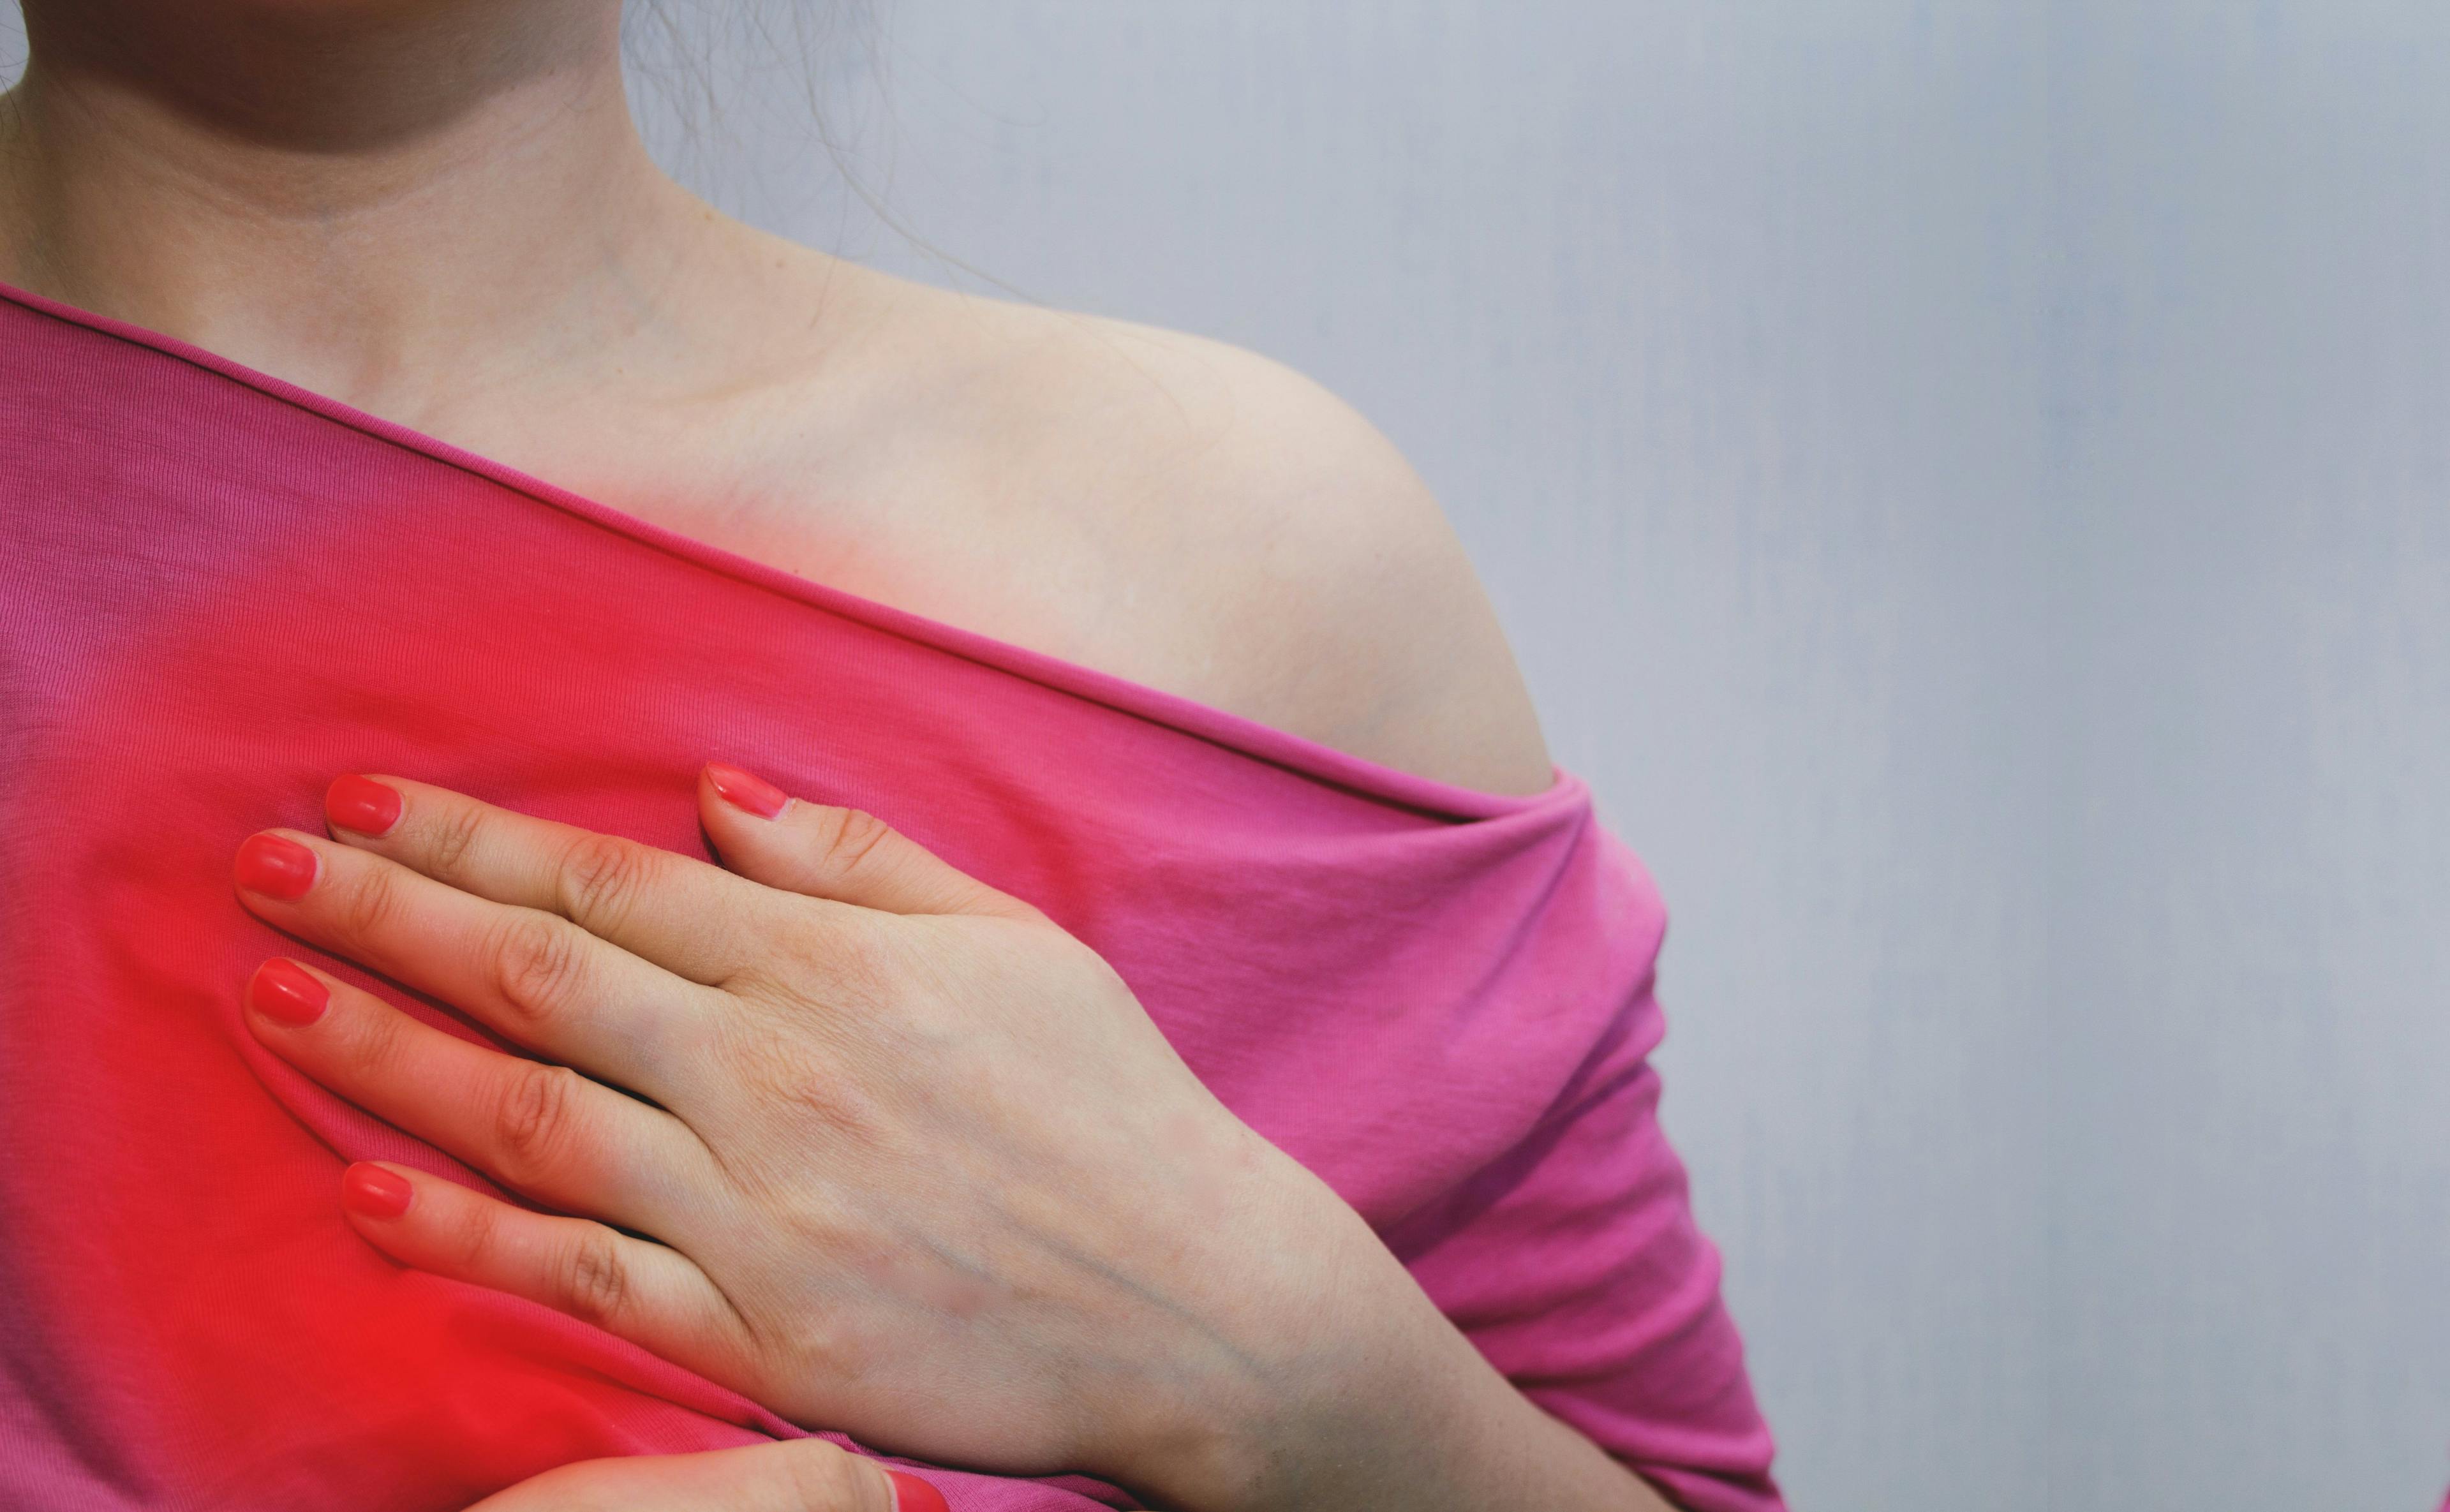 Young Women Fair Worse After Heart Attack Compared With Men